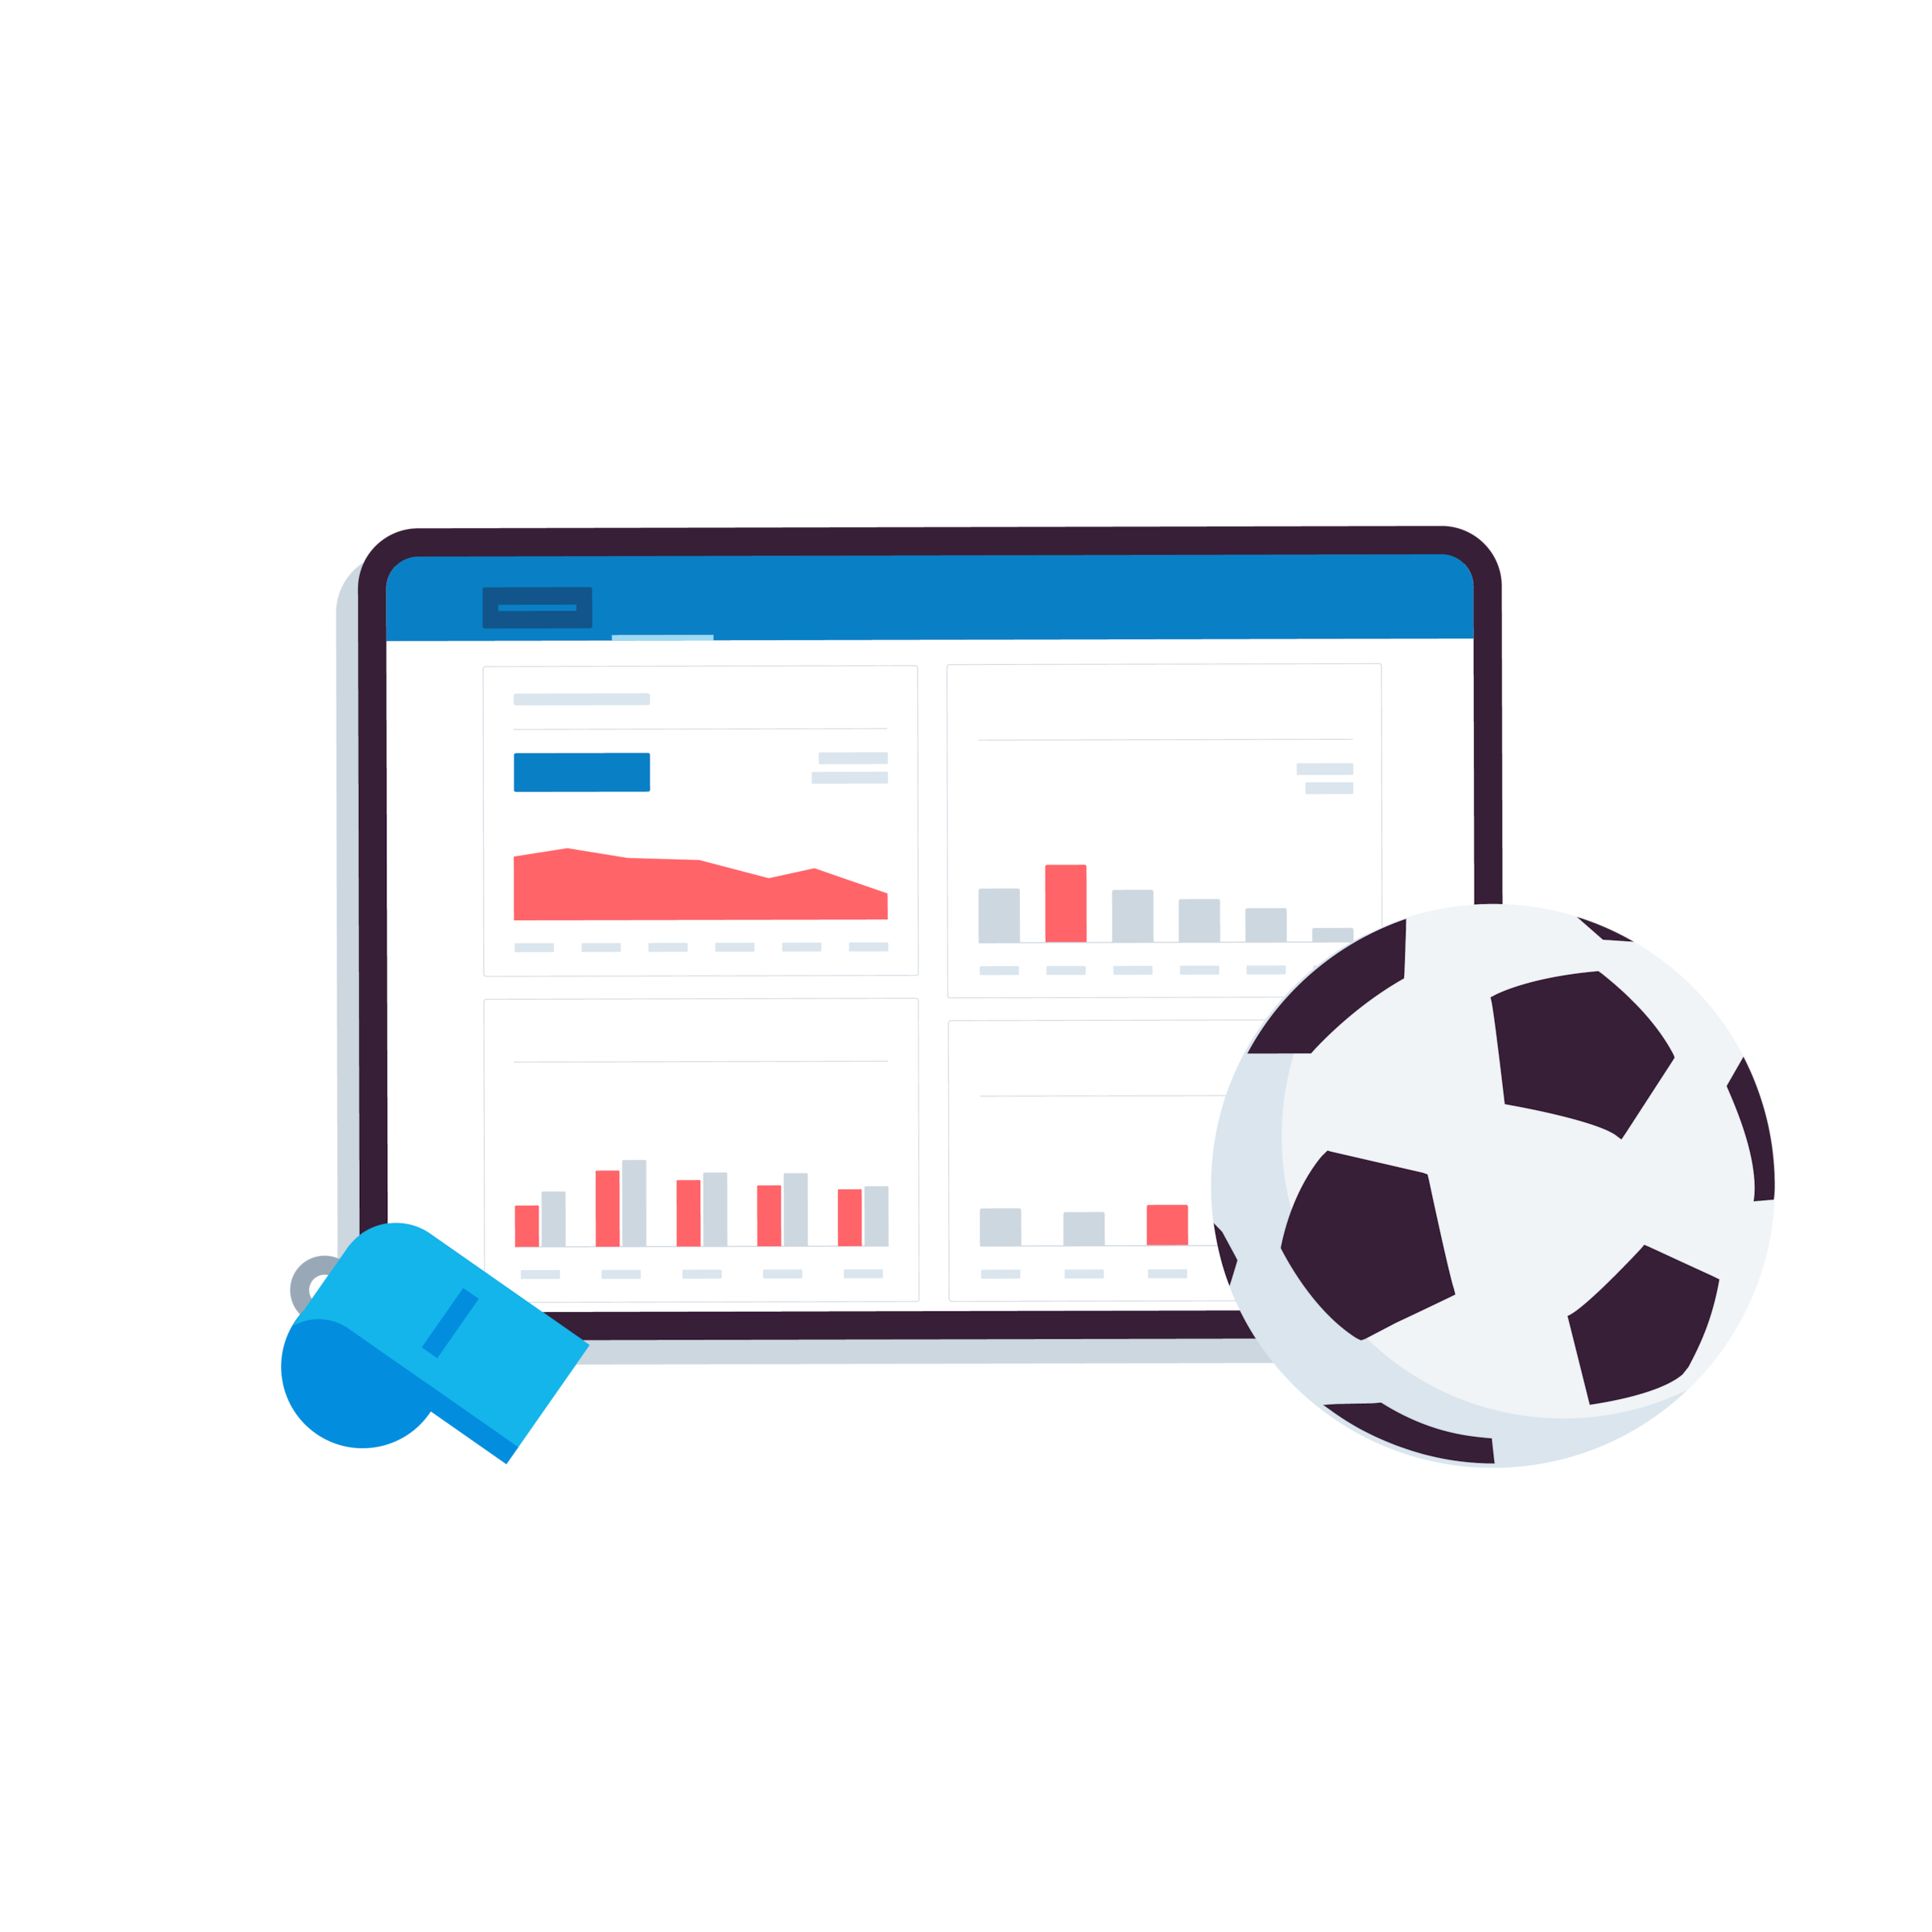 Charts on the Xero dashboard and a football